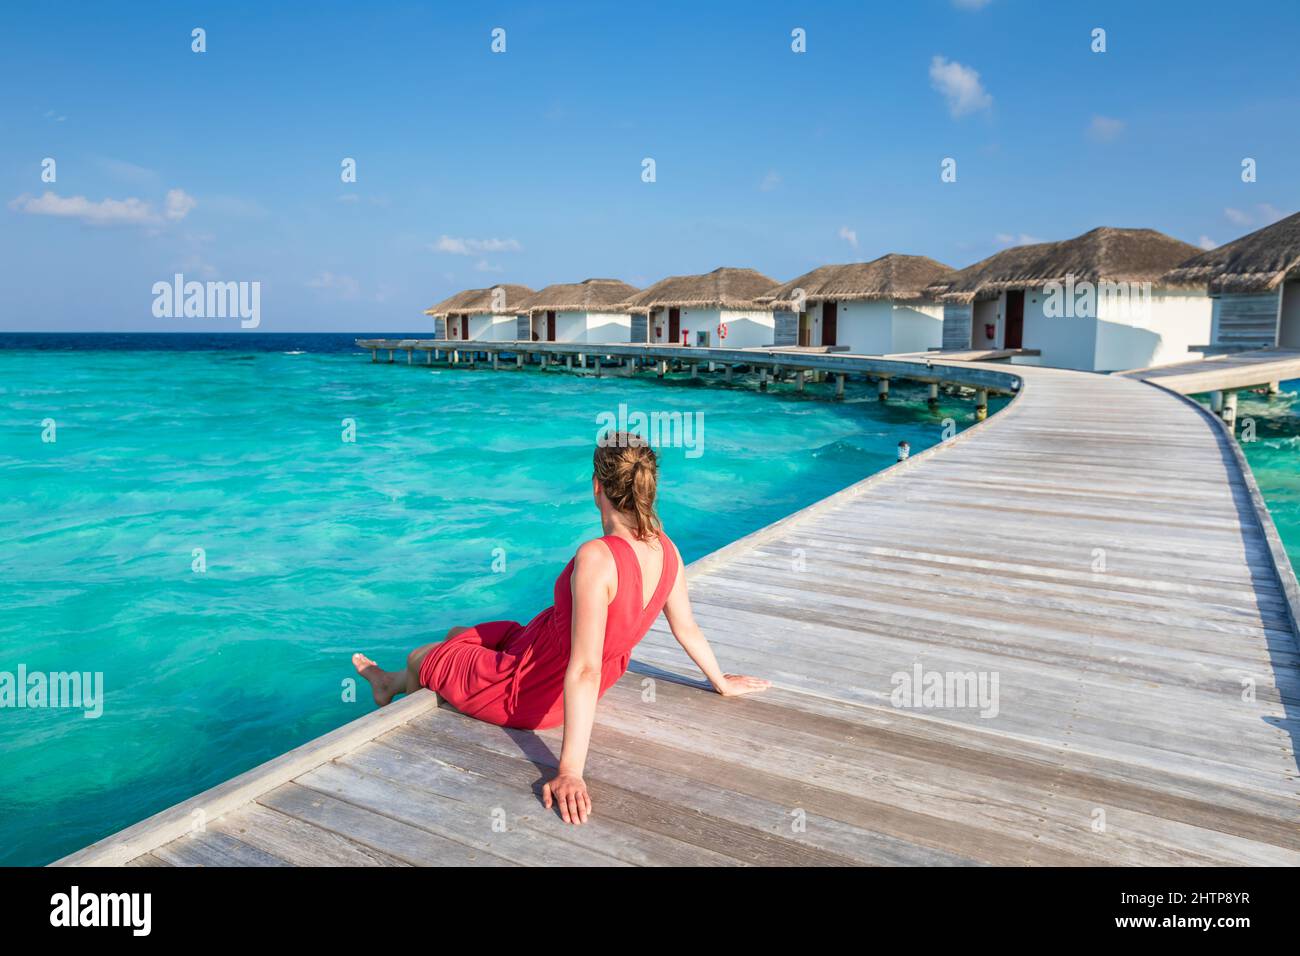 Beach vacation holidays with woman relaxing on wooden pier at luxurious hotel resort in Maldives with overwater villas, turquoise sea water and blue s Stock Photo